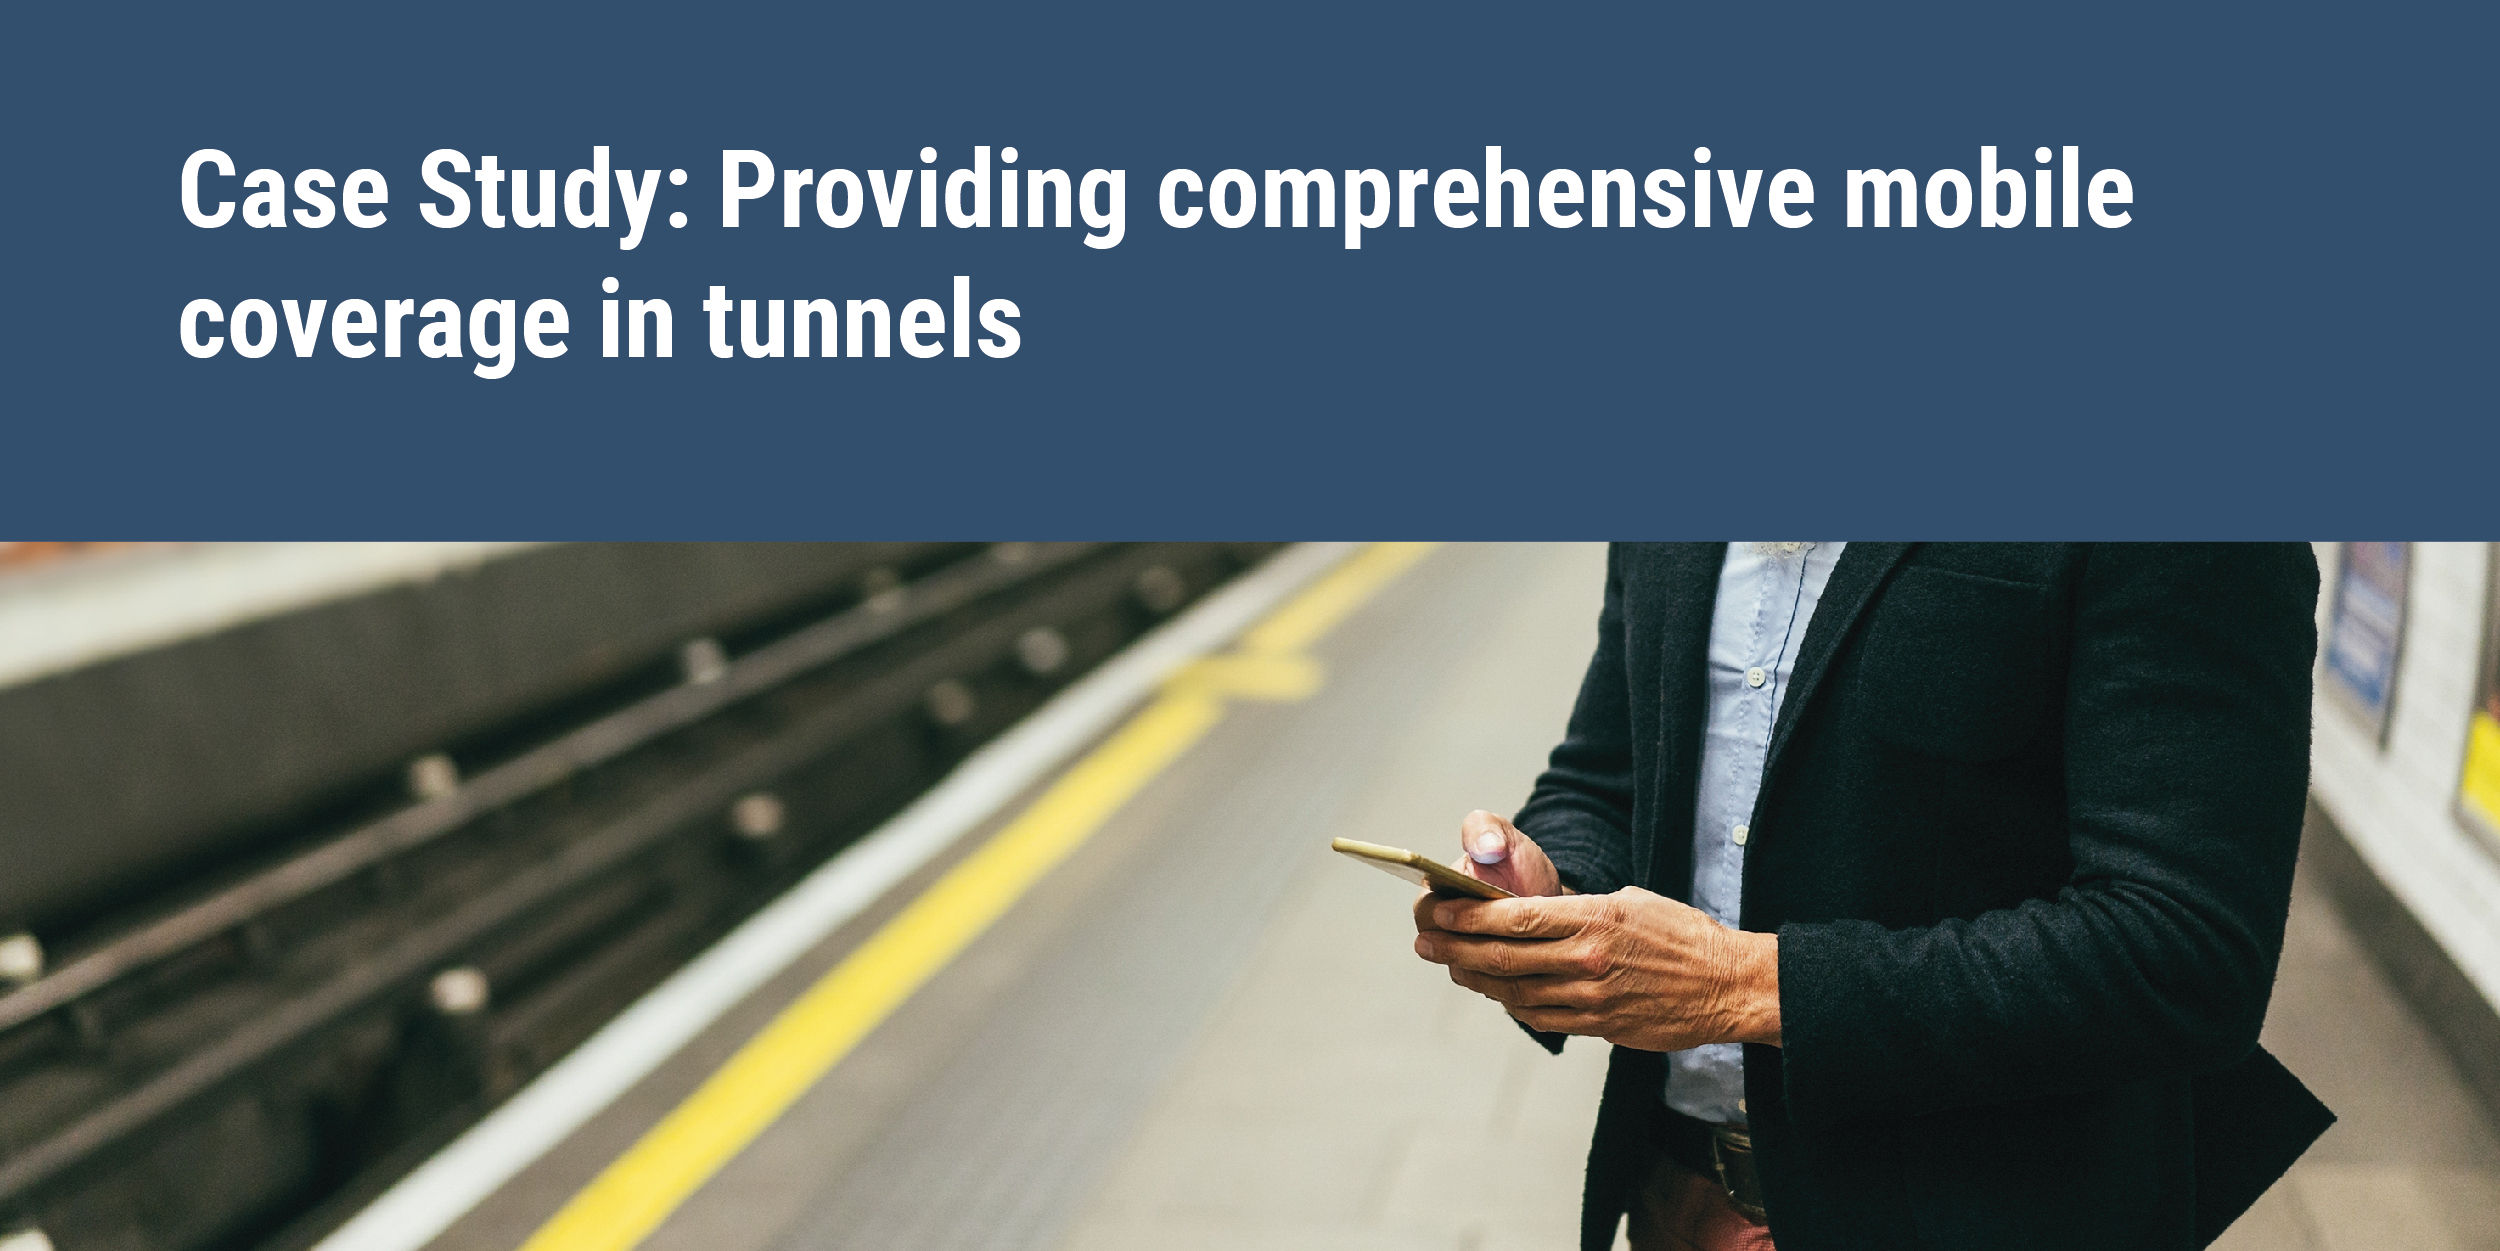 Mobile coverage in tunnels